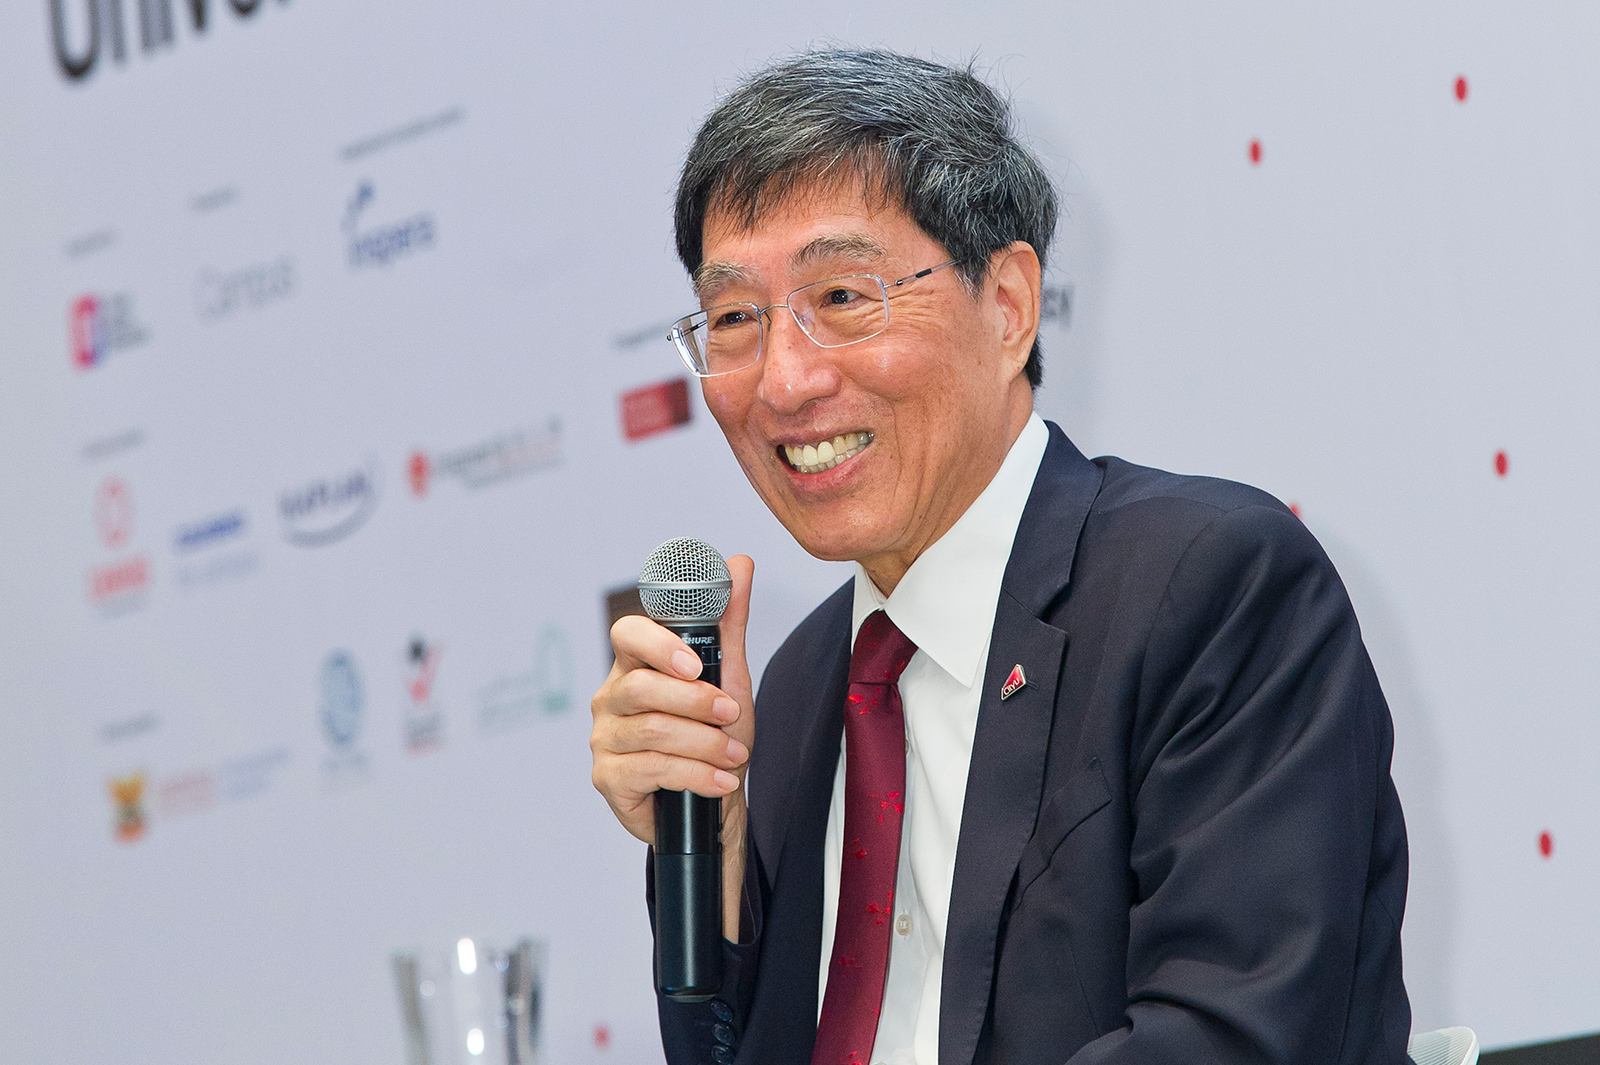 President Kuo delivered his key-note speech at Digital University Asia forum.